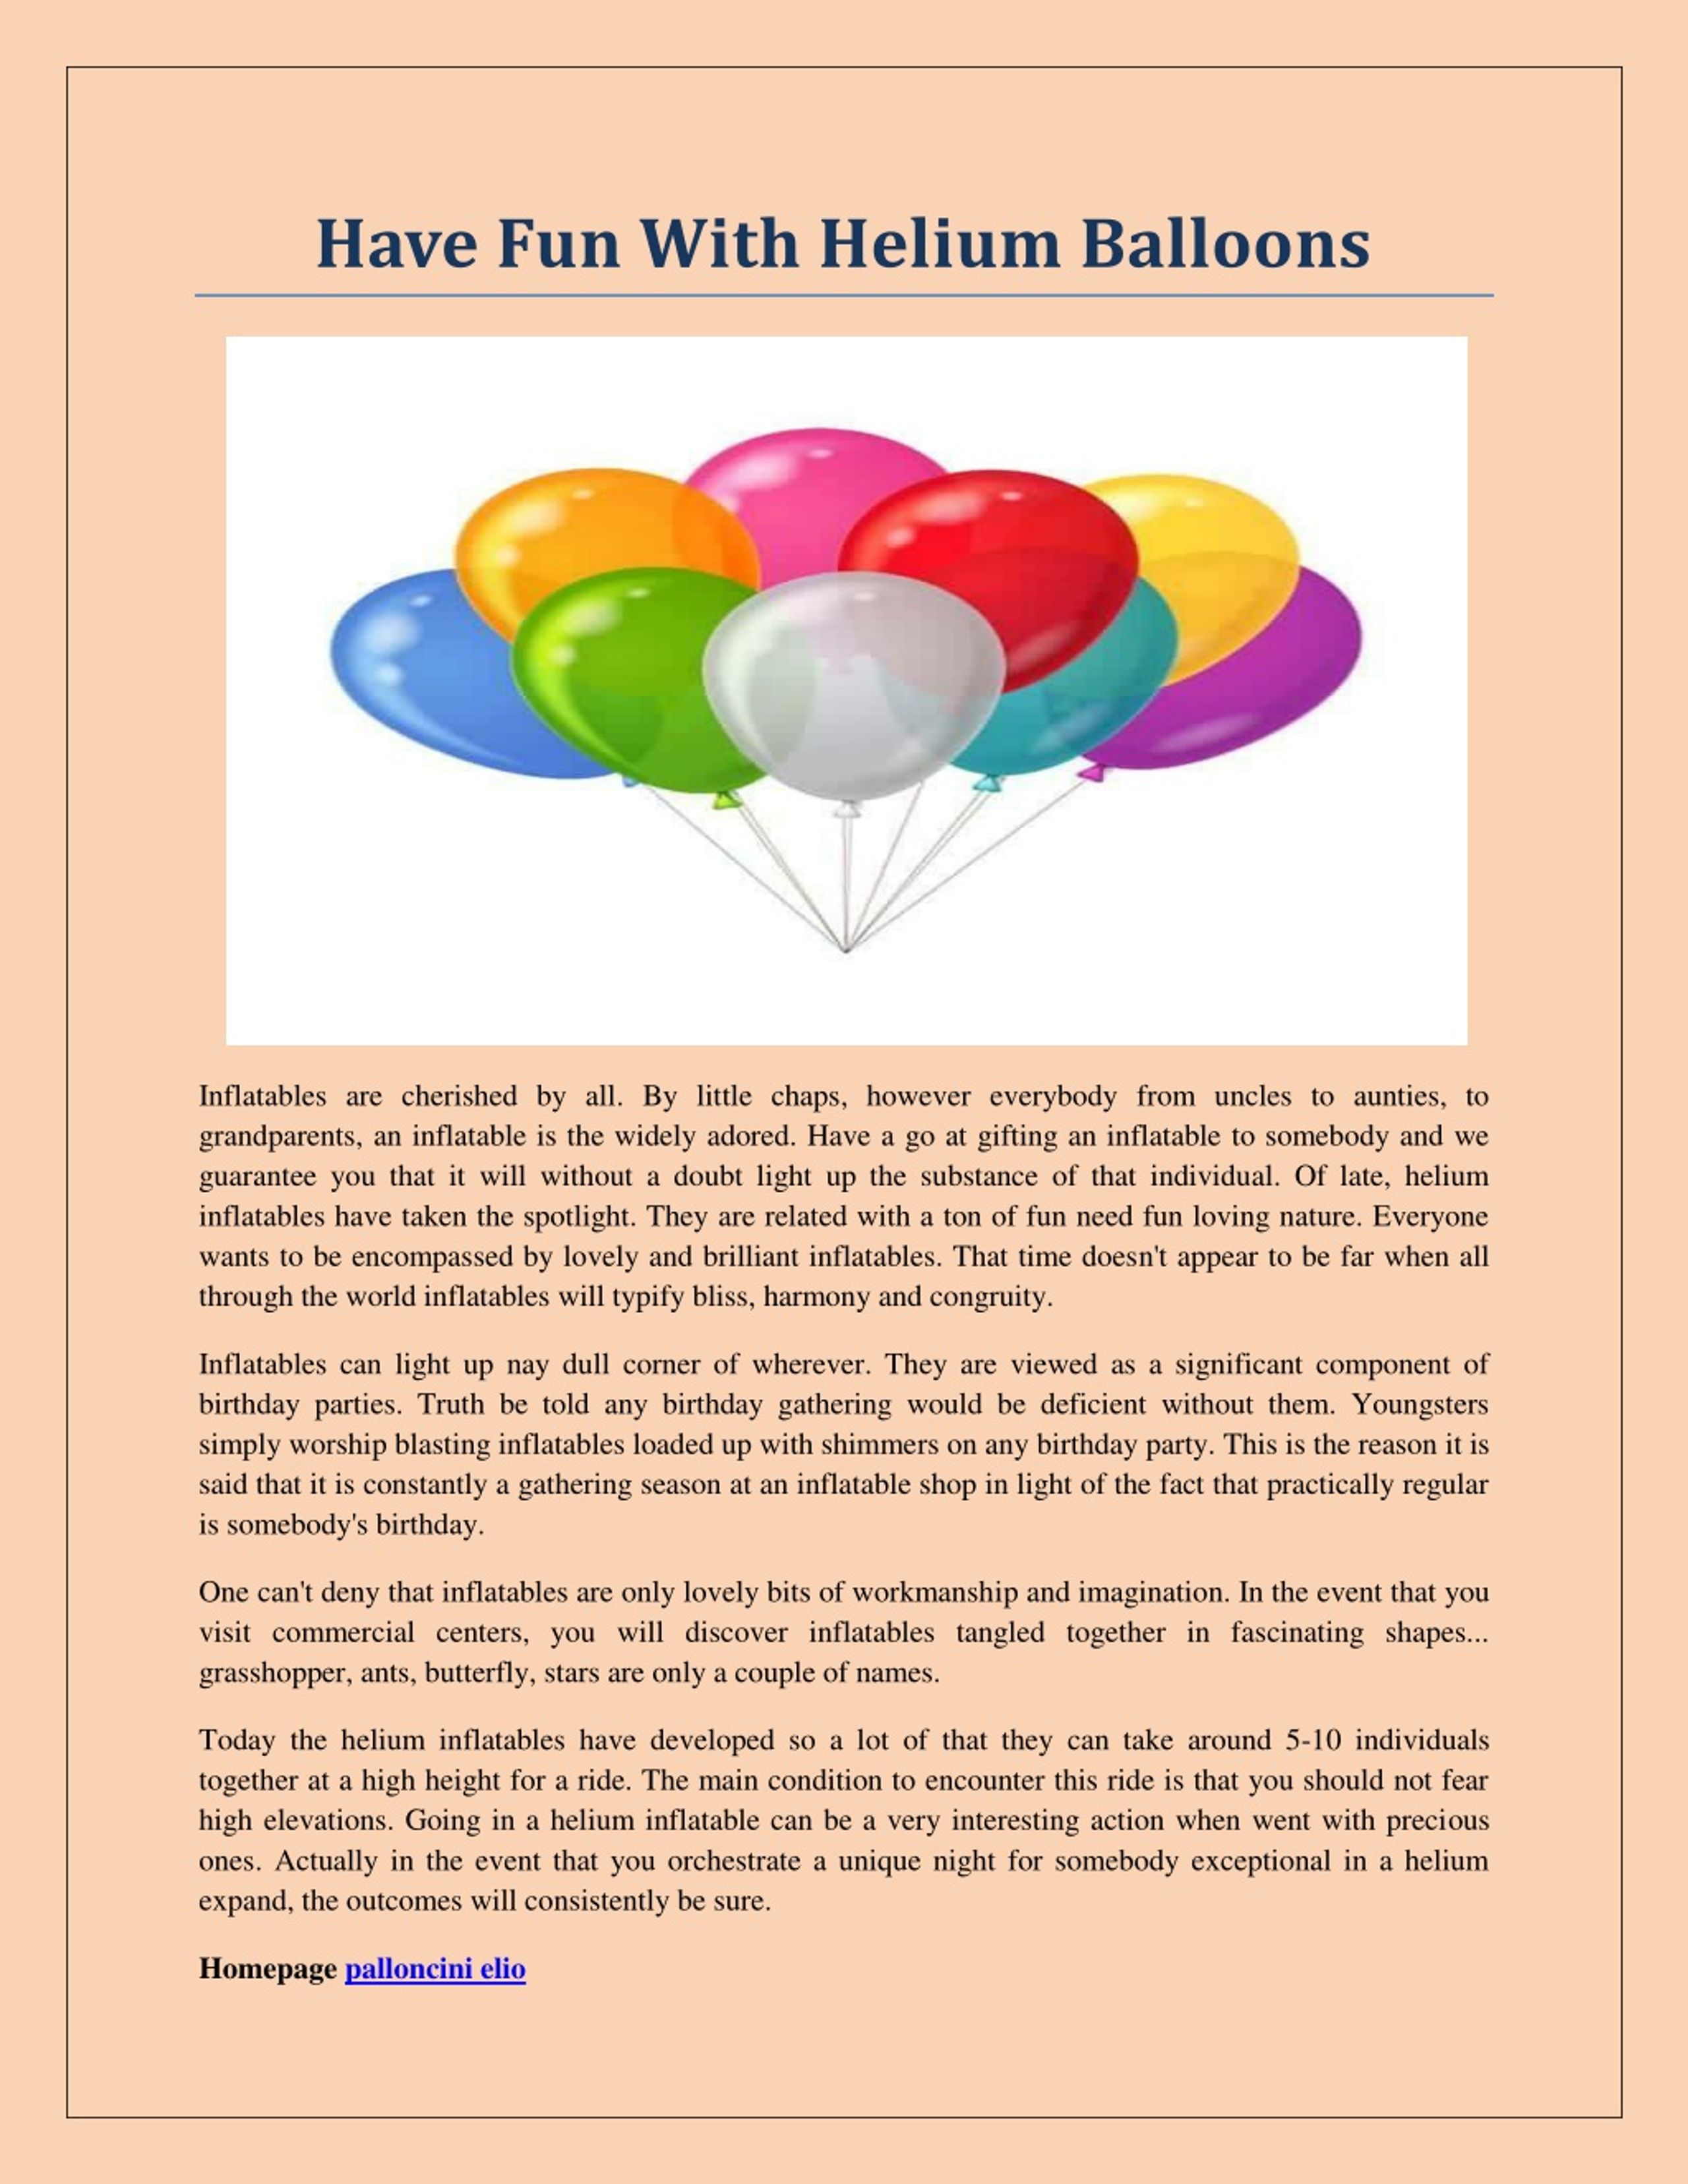 https://image4.slideserve.com/8888236/have-fun-with-helium-balloons-l.jpg